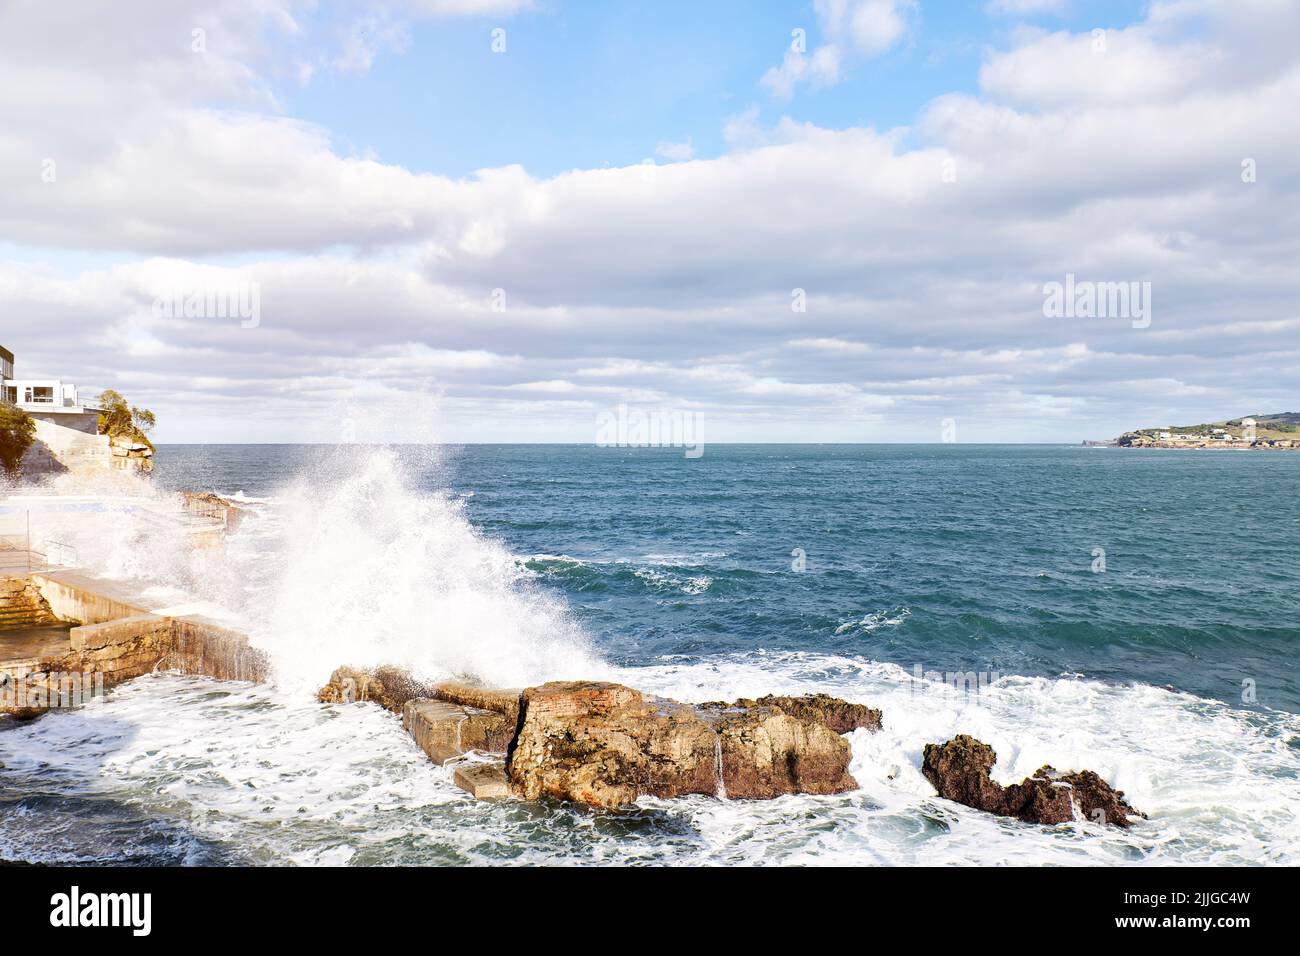 Waves breaking on rocks on the shore overlooking a coastal town. Concept travel, vacation Stock Photo